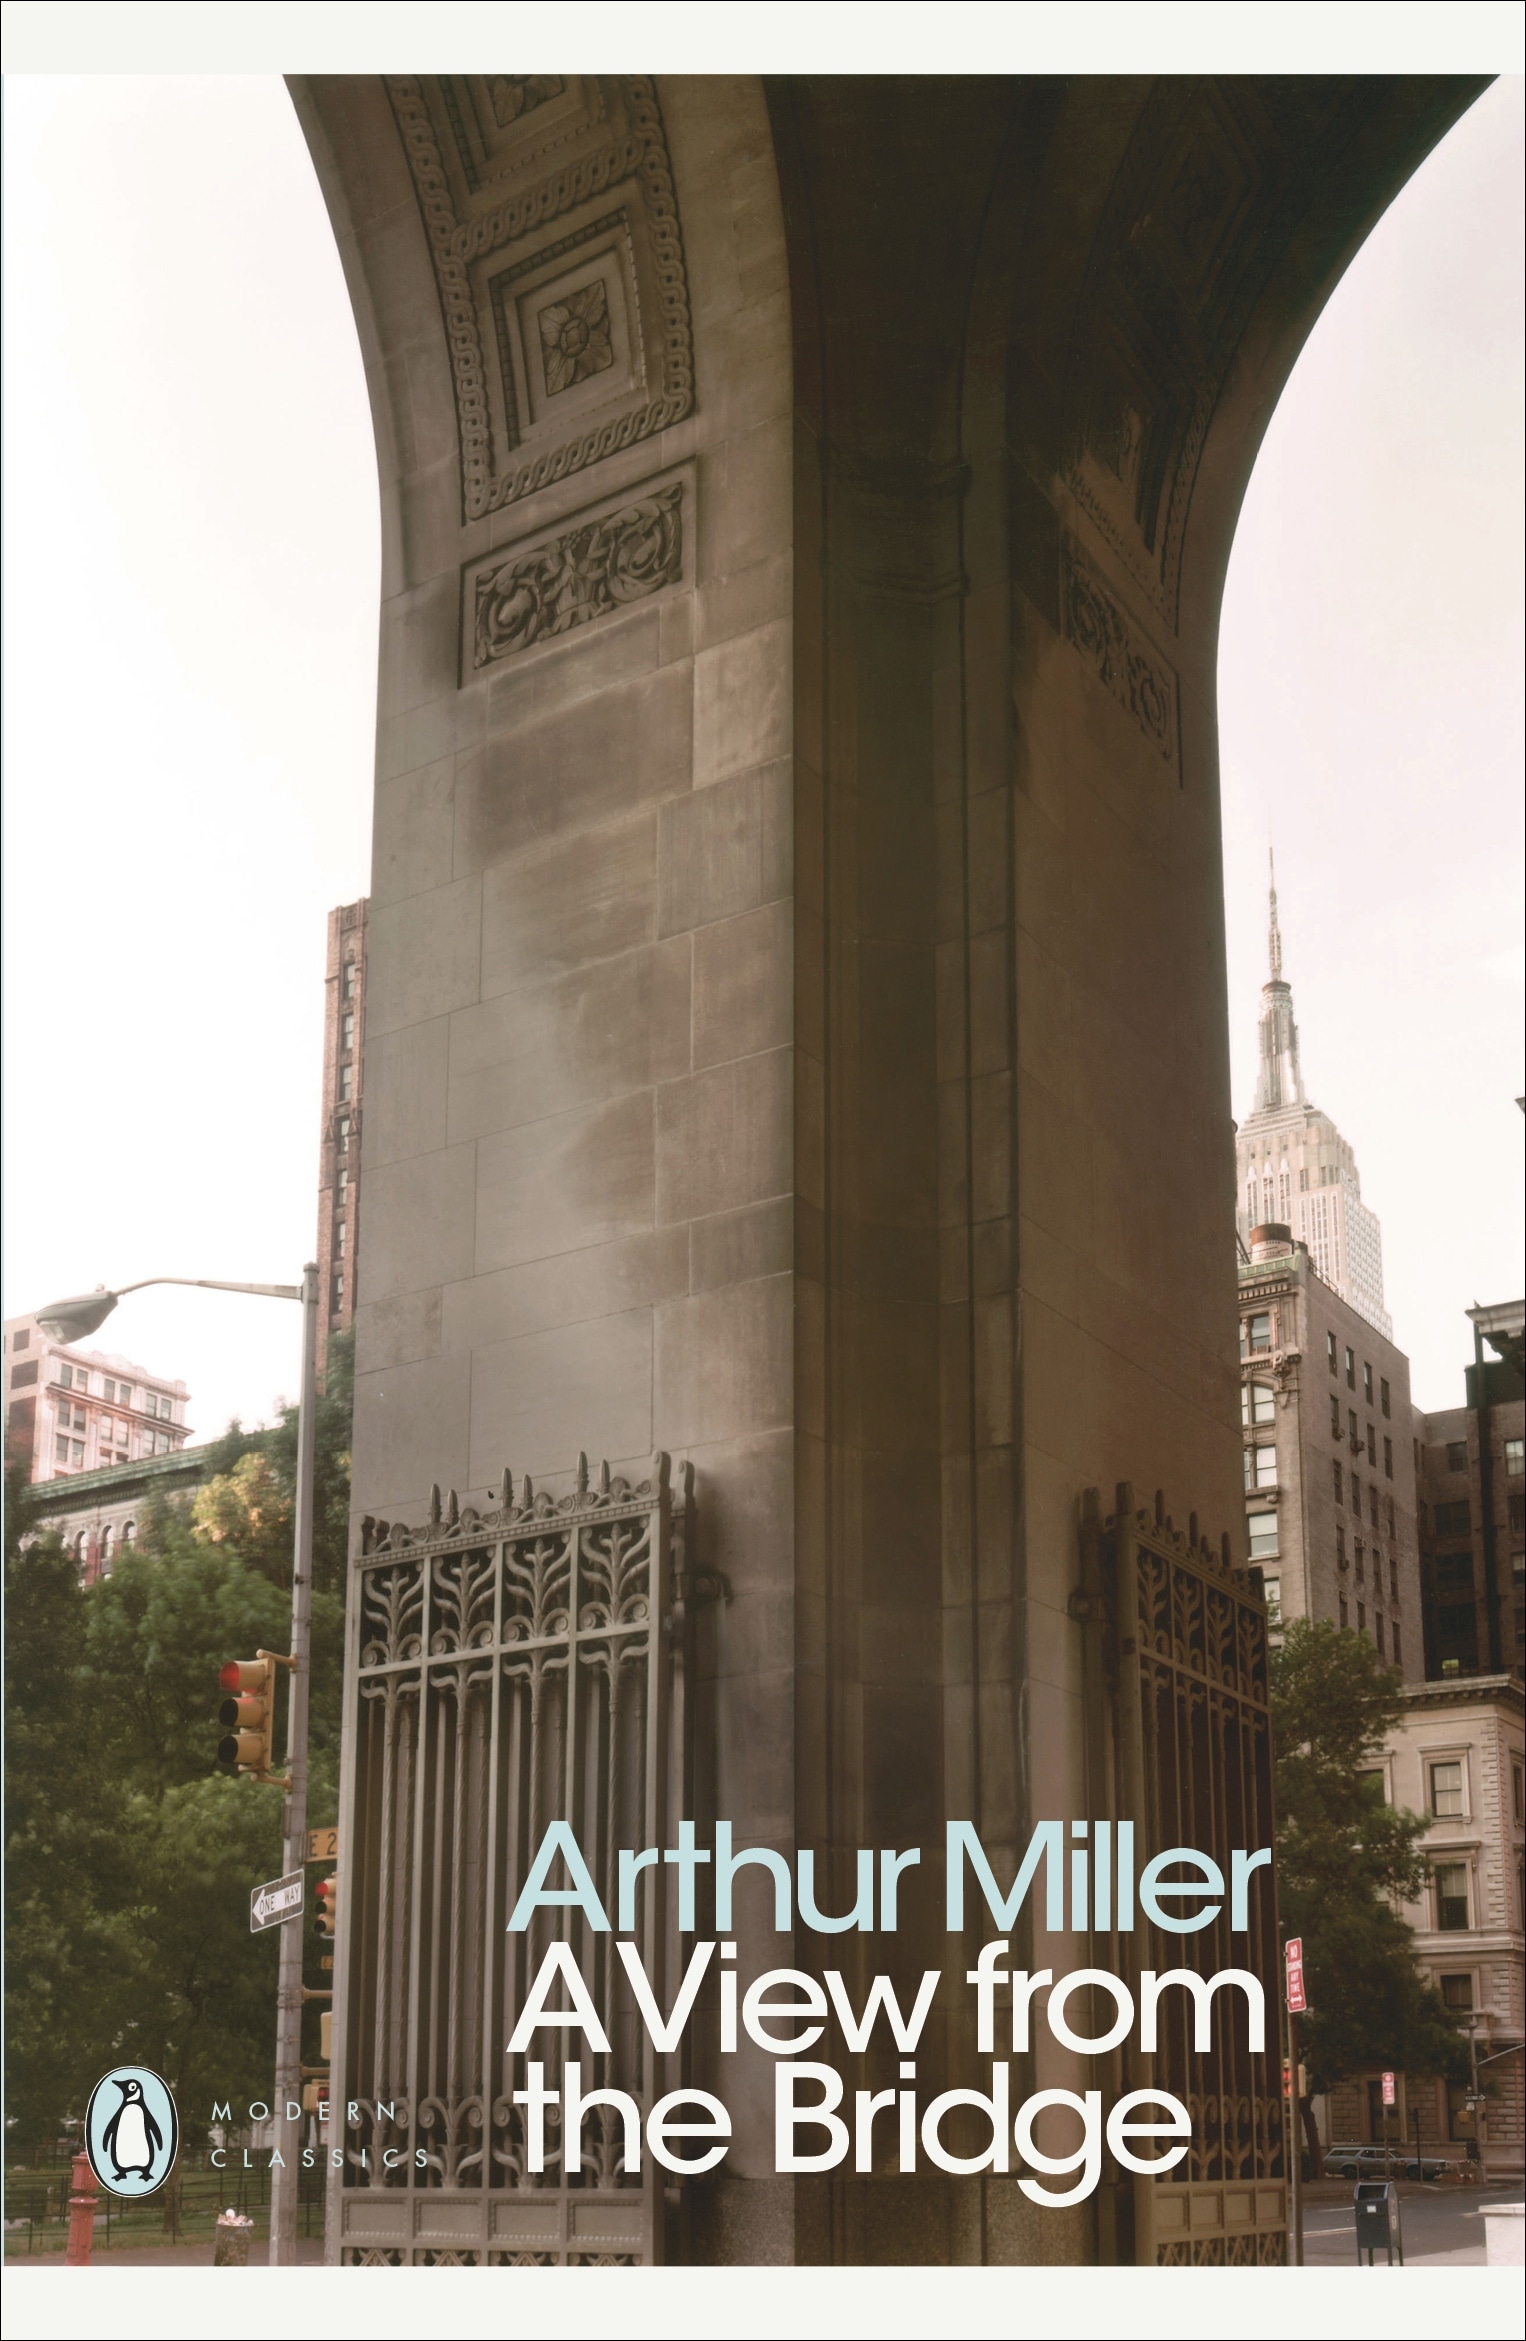 Book “A View from the Bridge” by Arthur Miller, Philip Seymour Hoffman — March 25, 2010